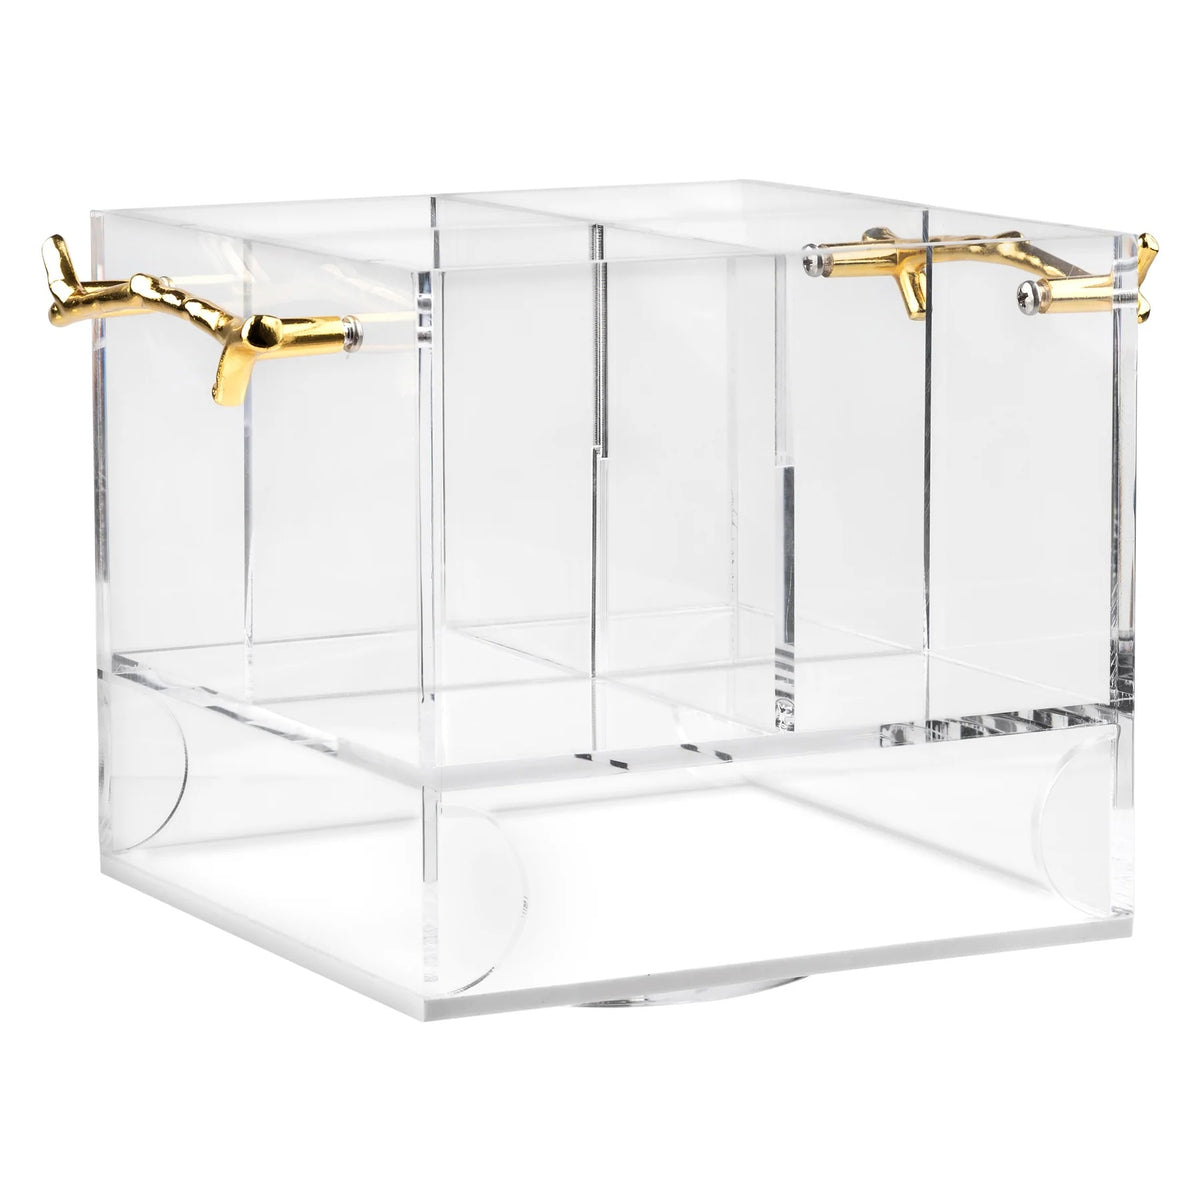 Waterdale Silverware Caddy - Square with Gold Twig Handles